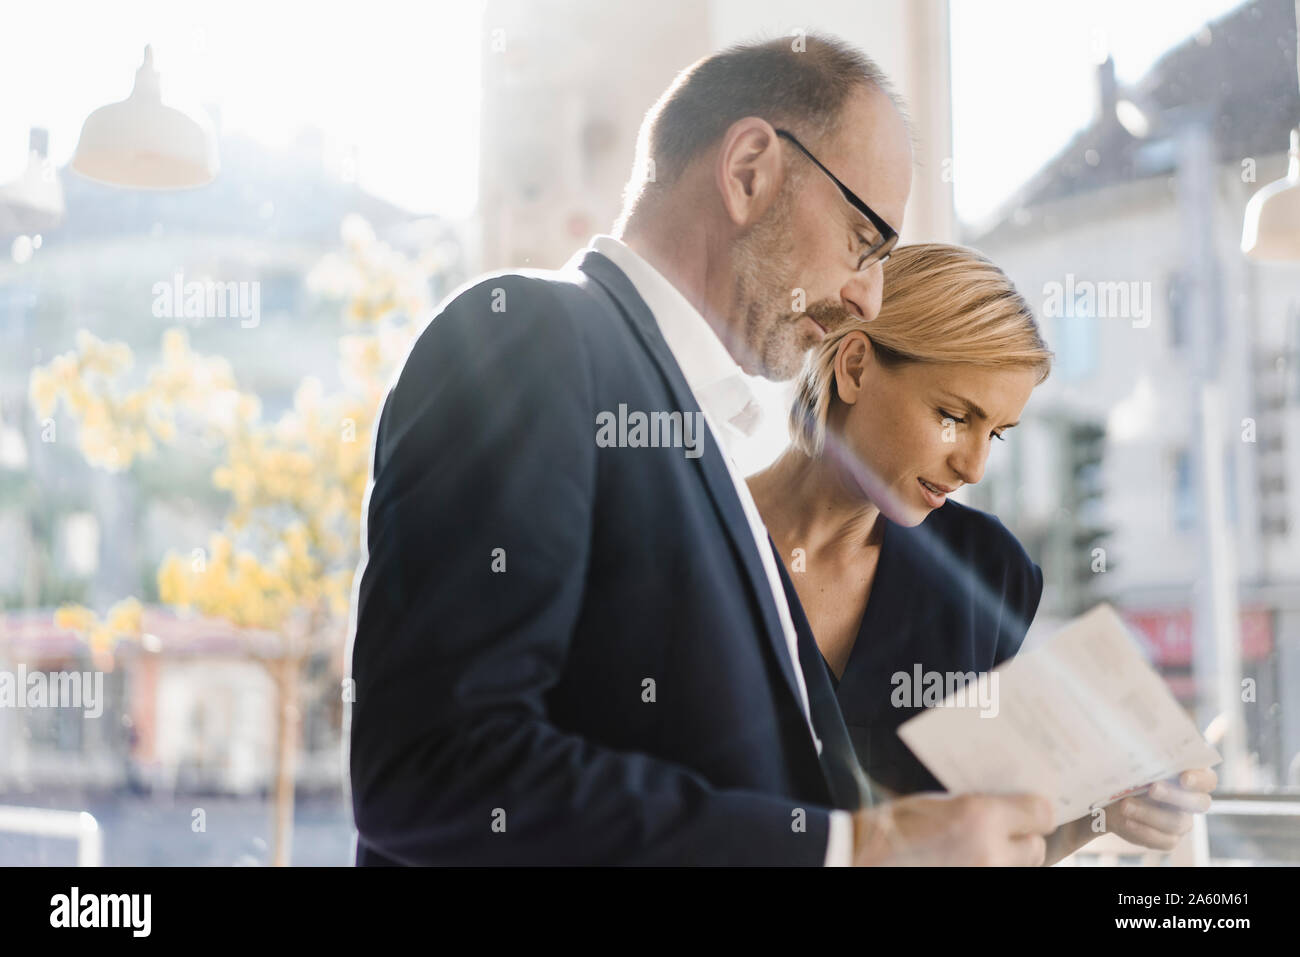 Businessman and woman reading menu in a coffee shop Stock Photo